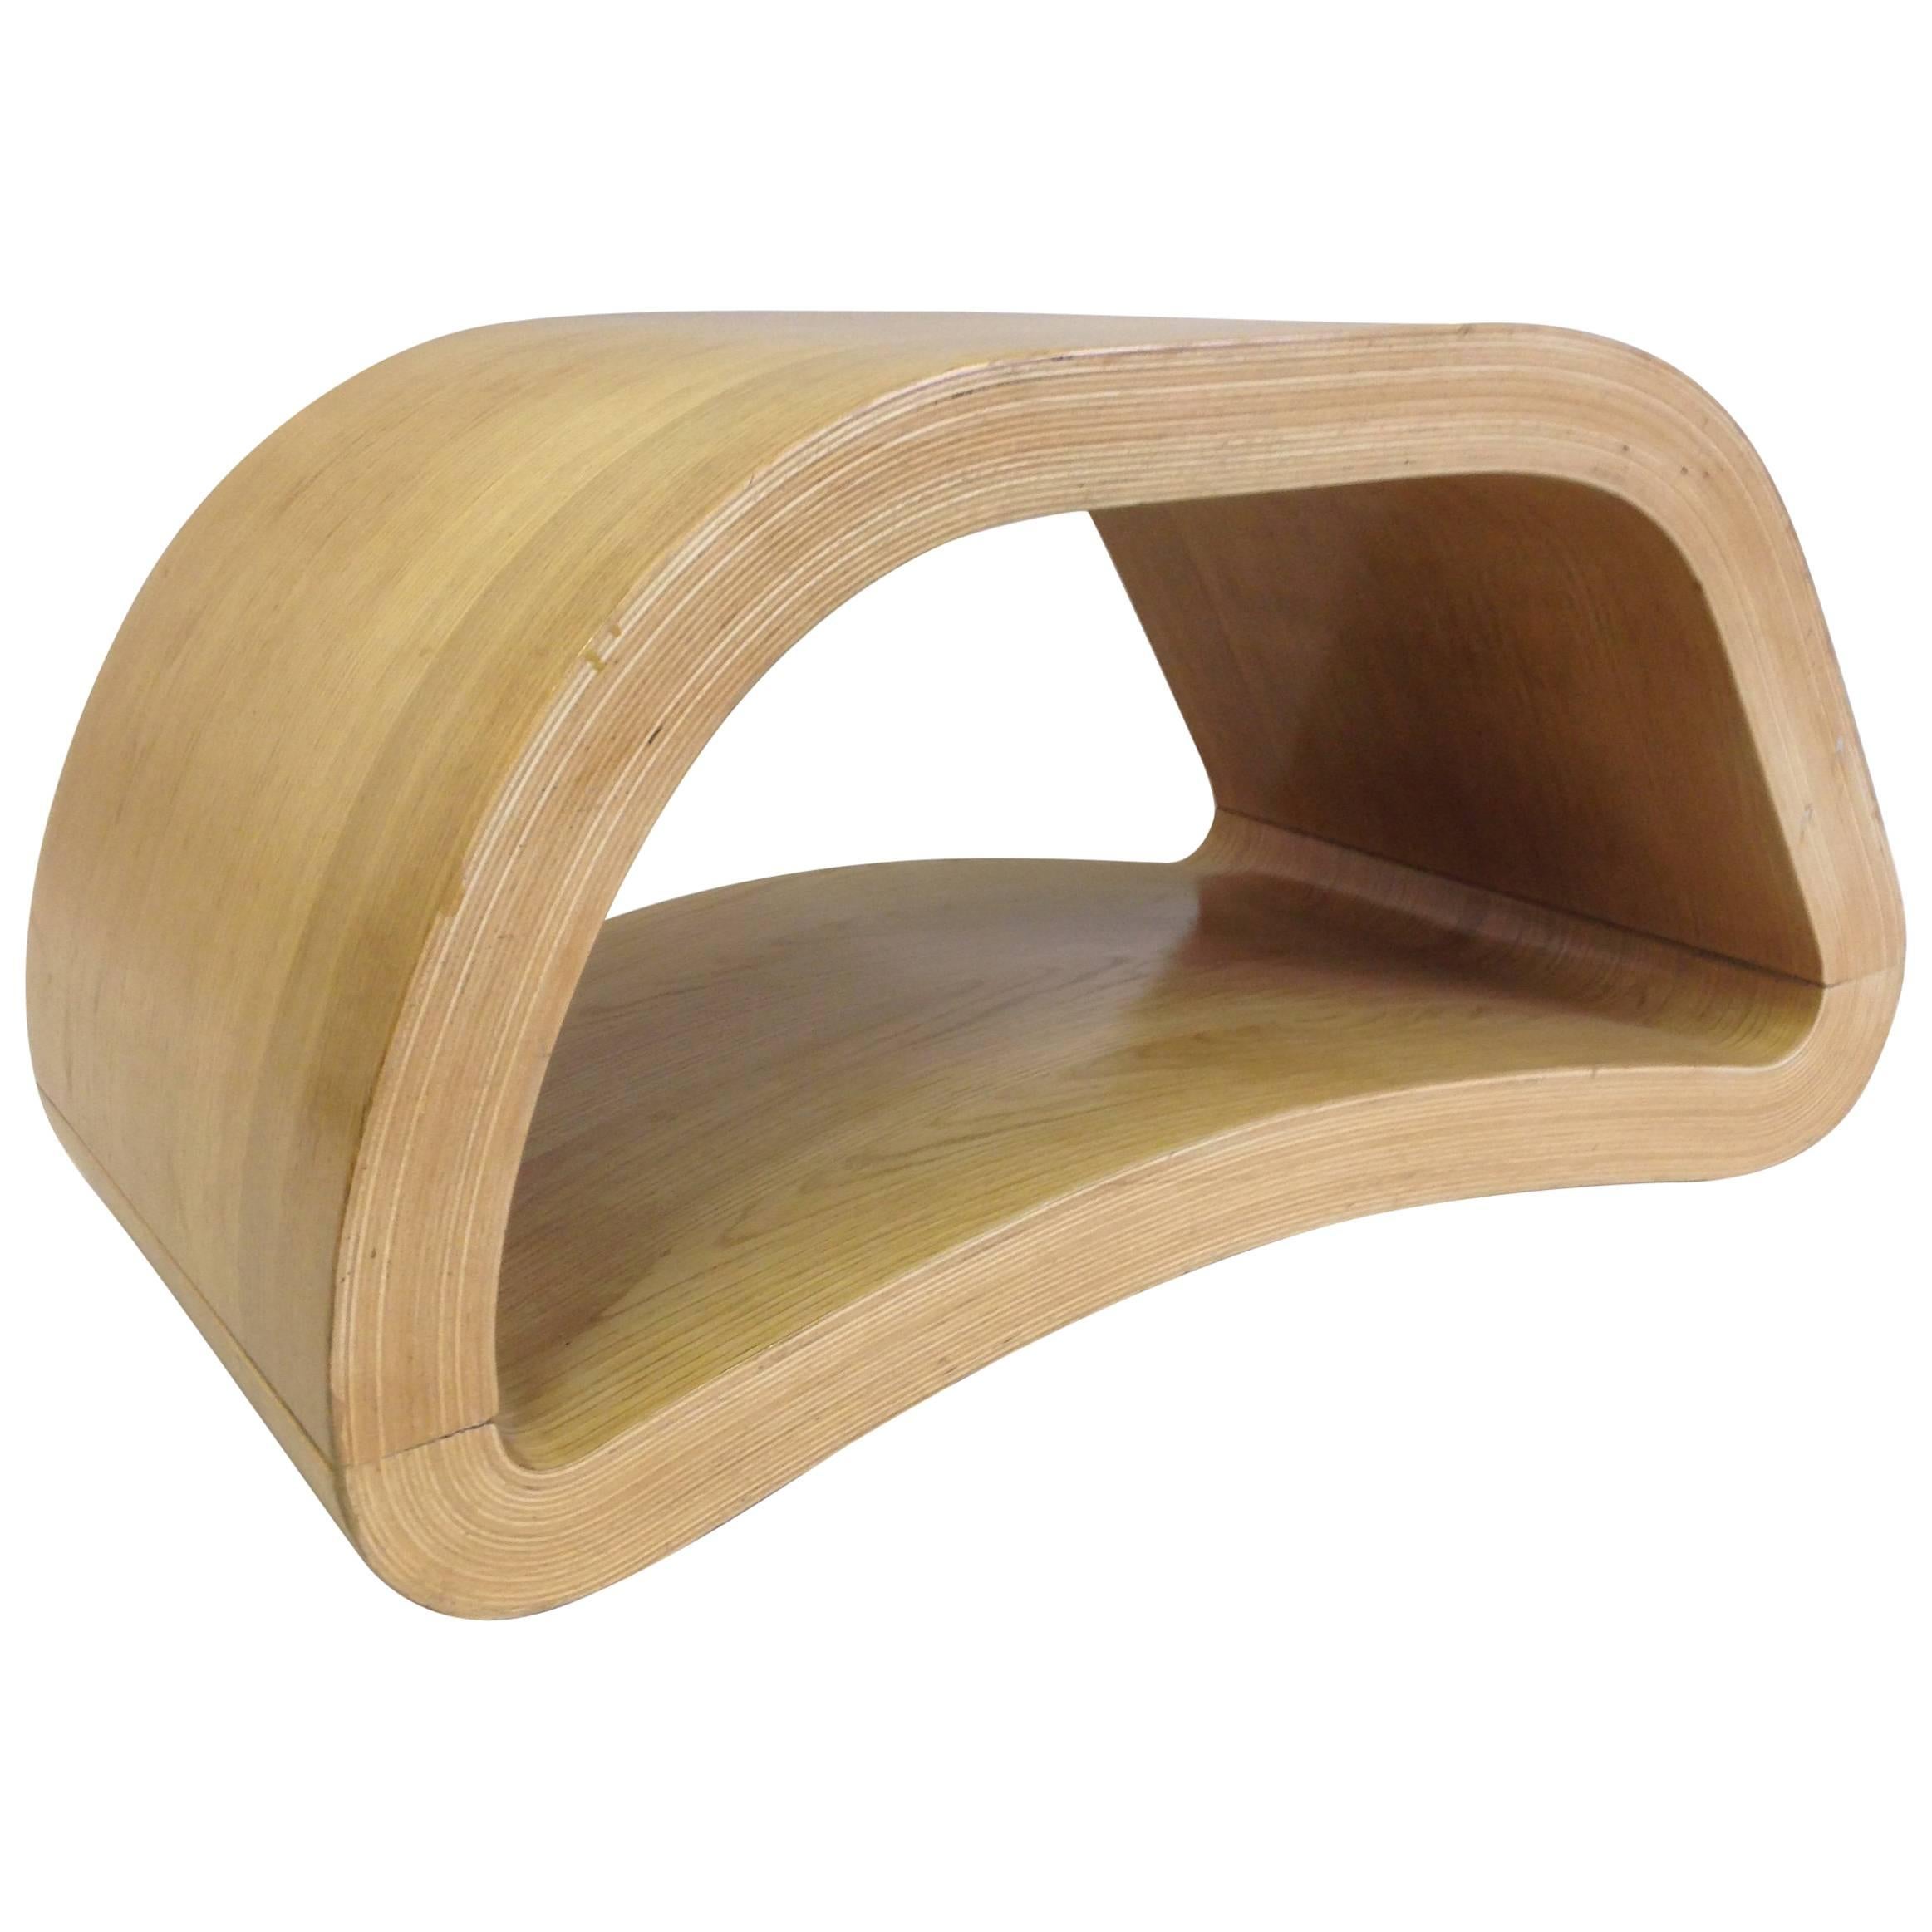 Rare Organic Modern Sculpture / Bench Attributed to Frederick Kiesler circa 1947 For Sale